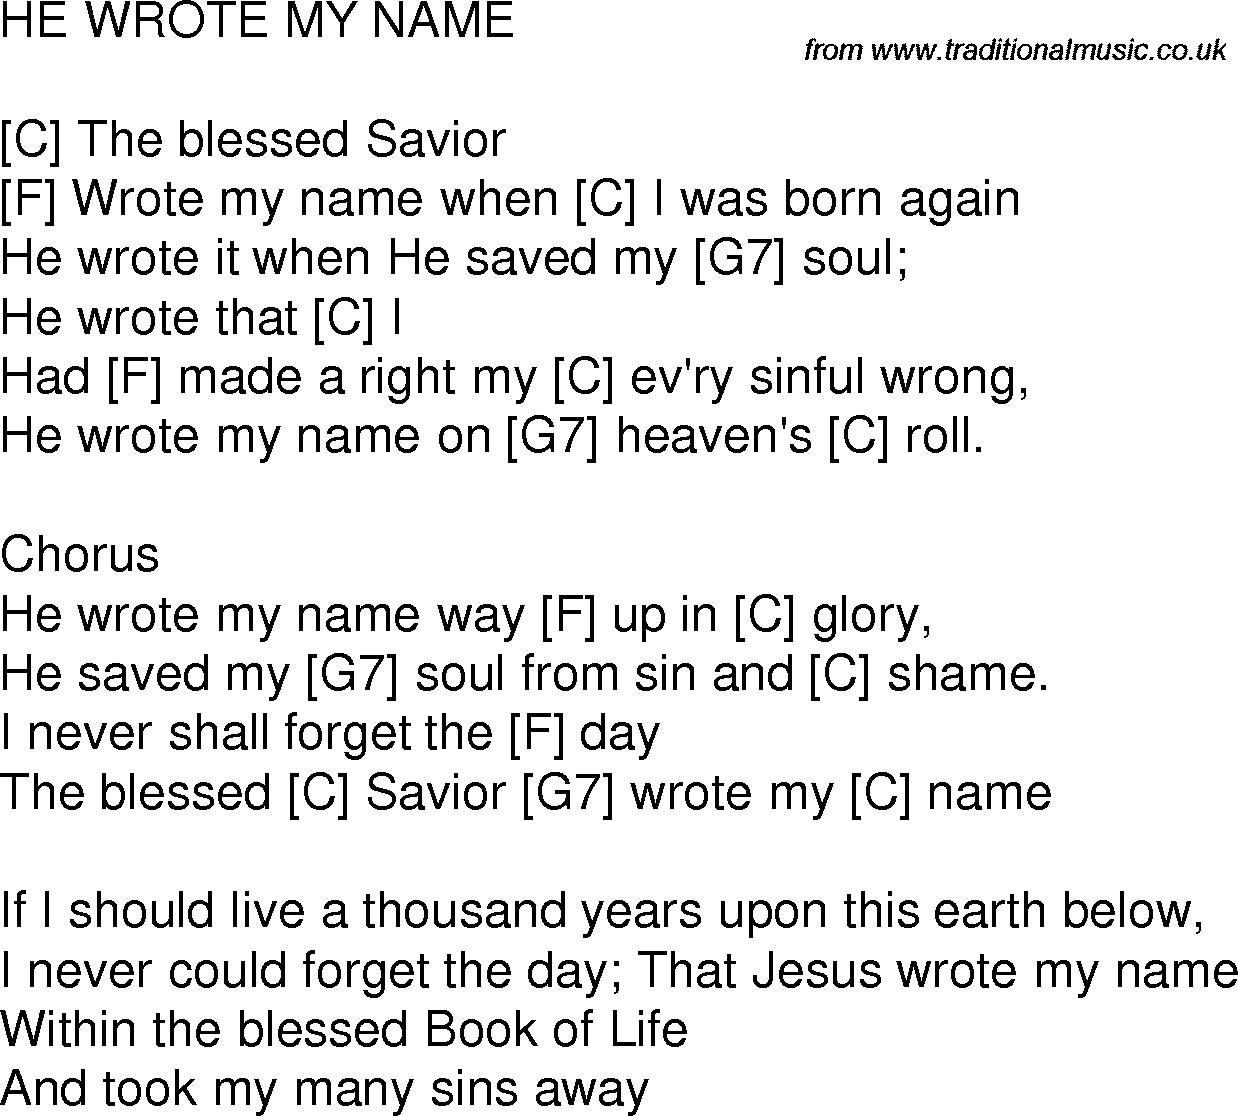 Old time song lyrics with chords for He Wrote My Name C